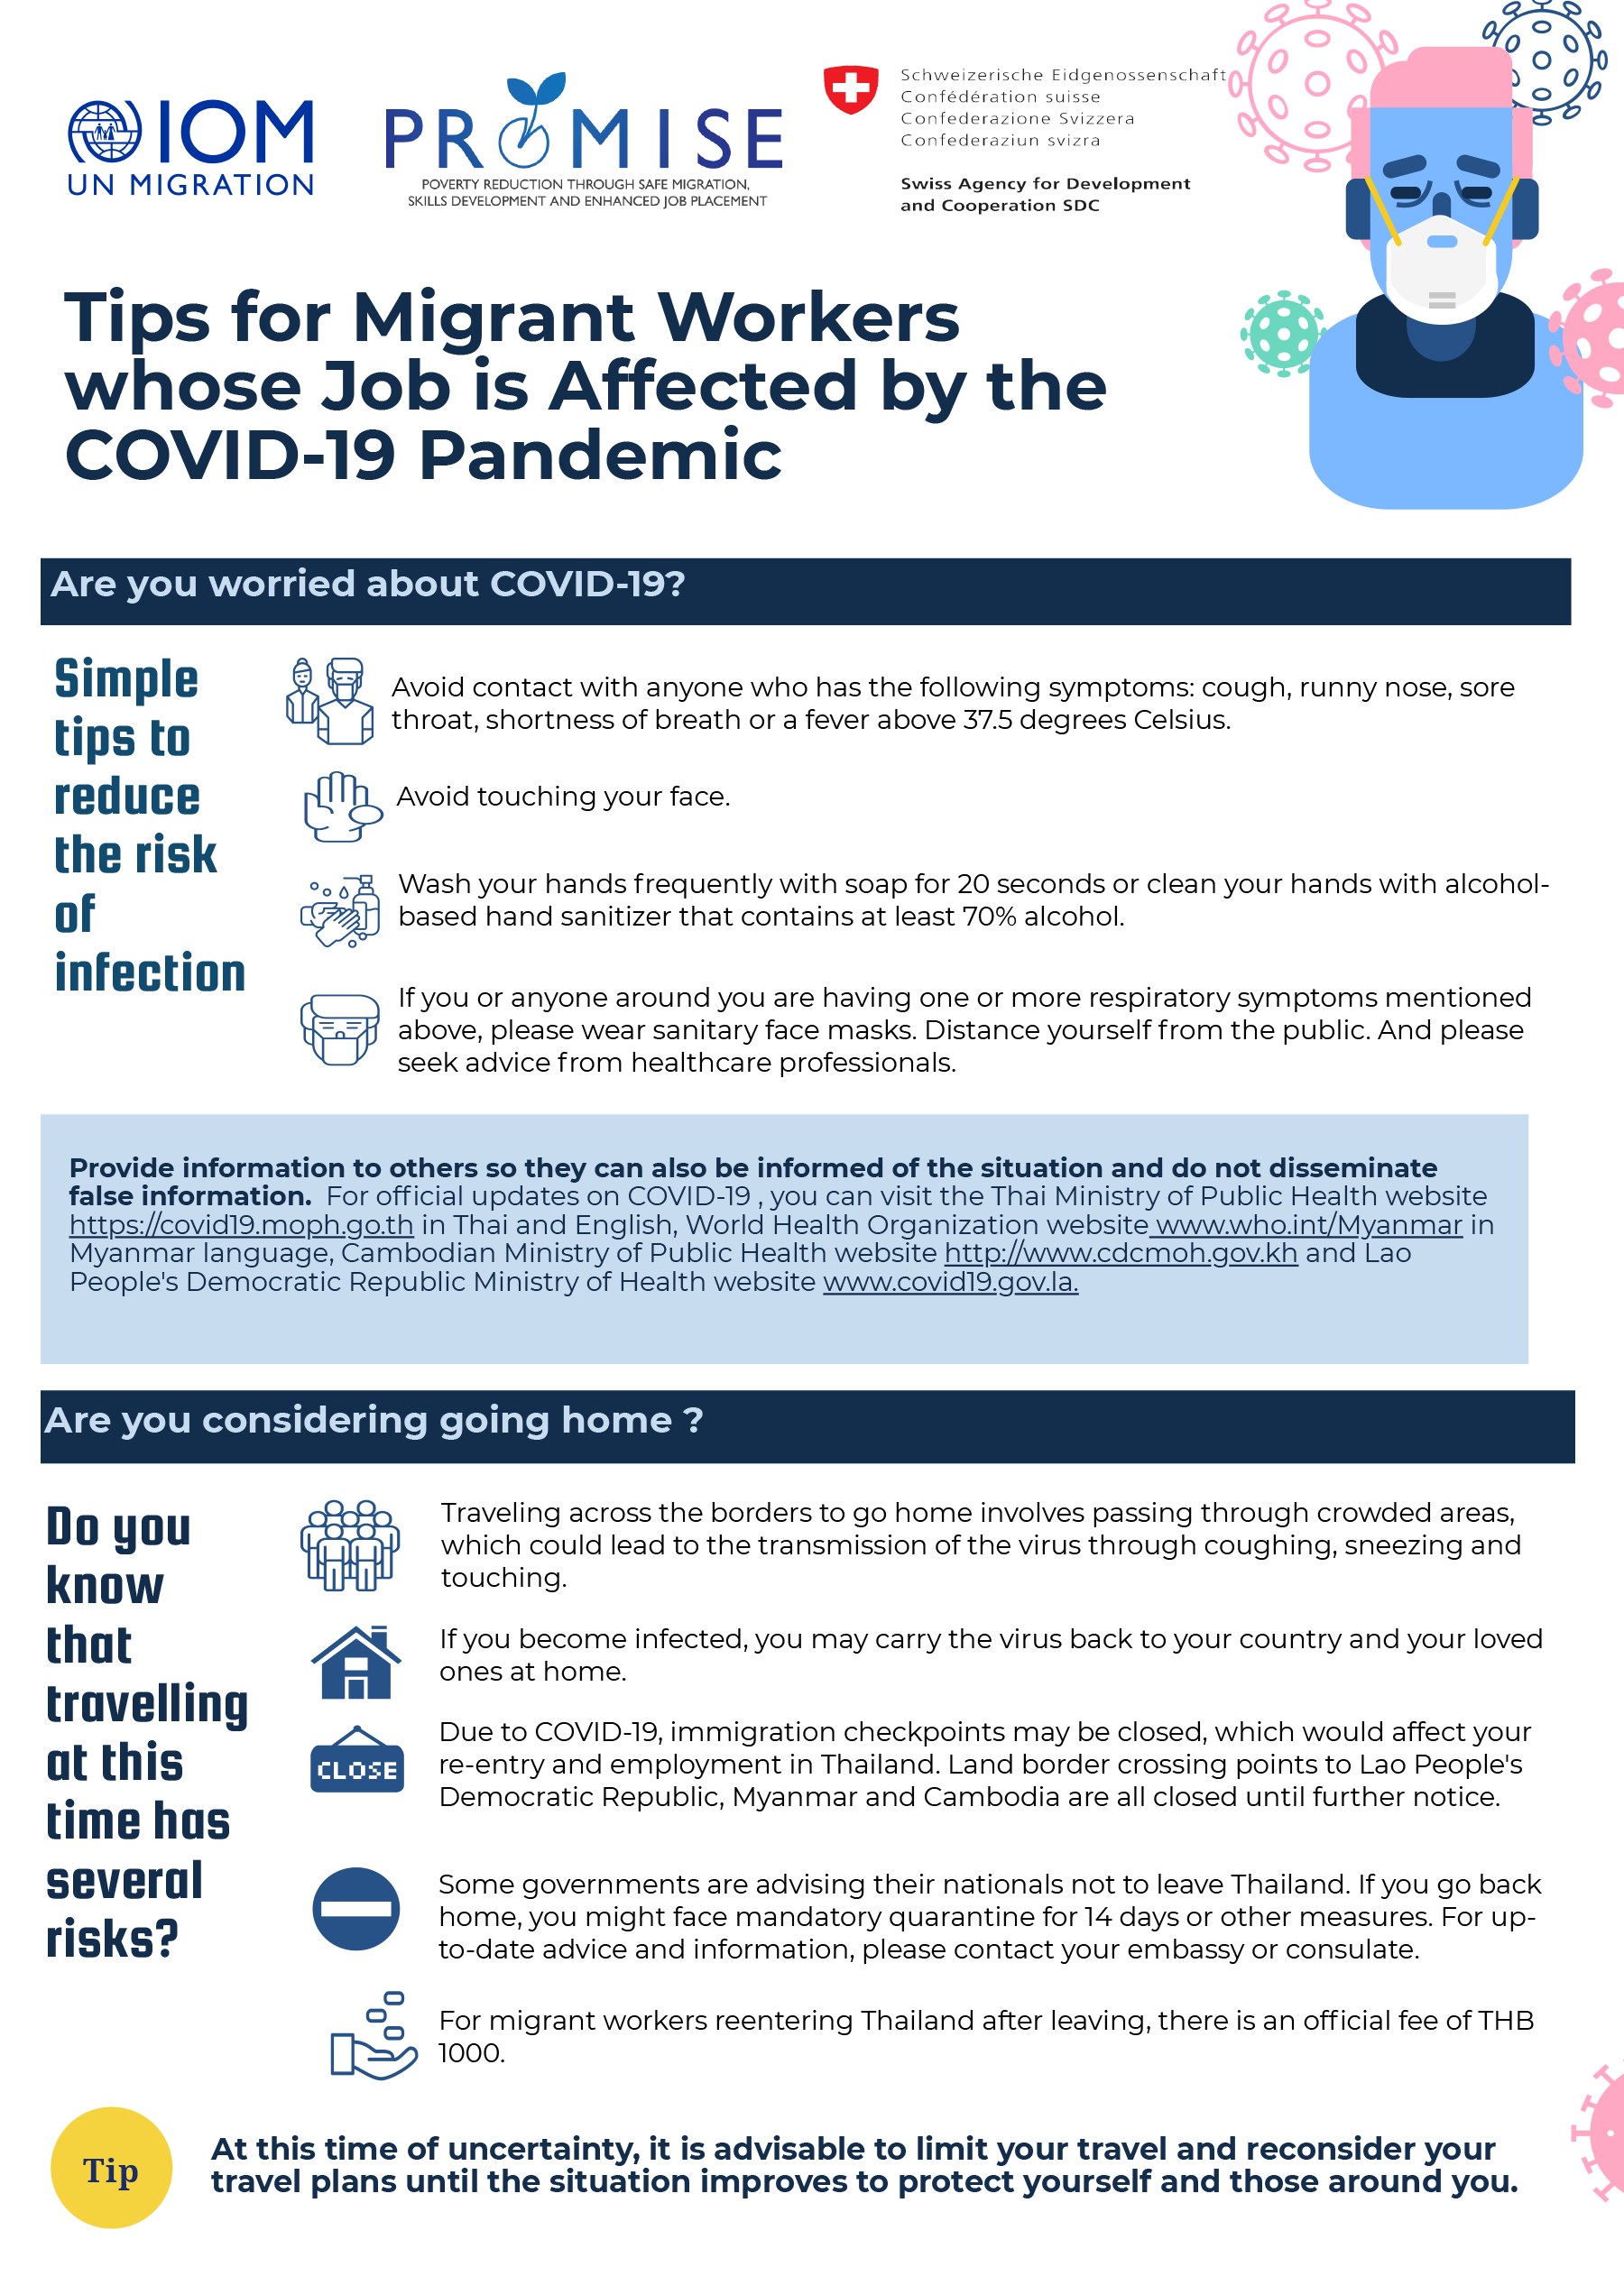 Tips for Migrant Workers whose Job is Affected by the COVID-19 Pandemic